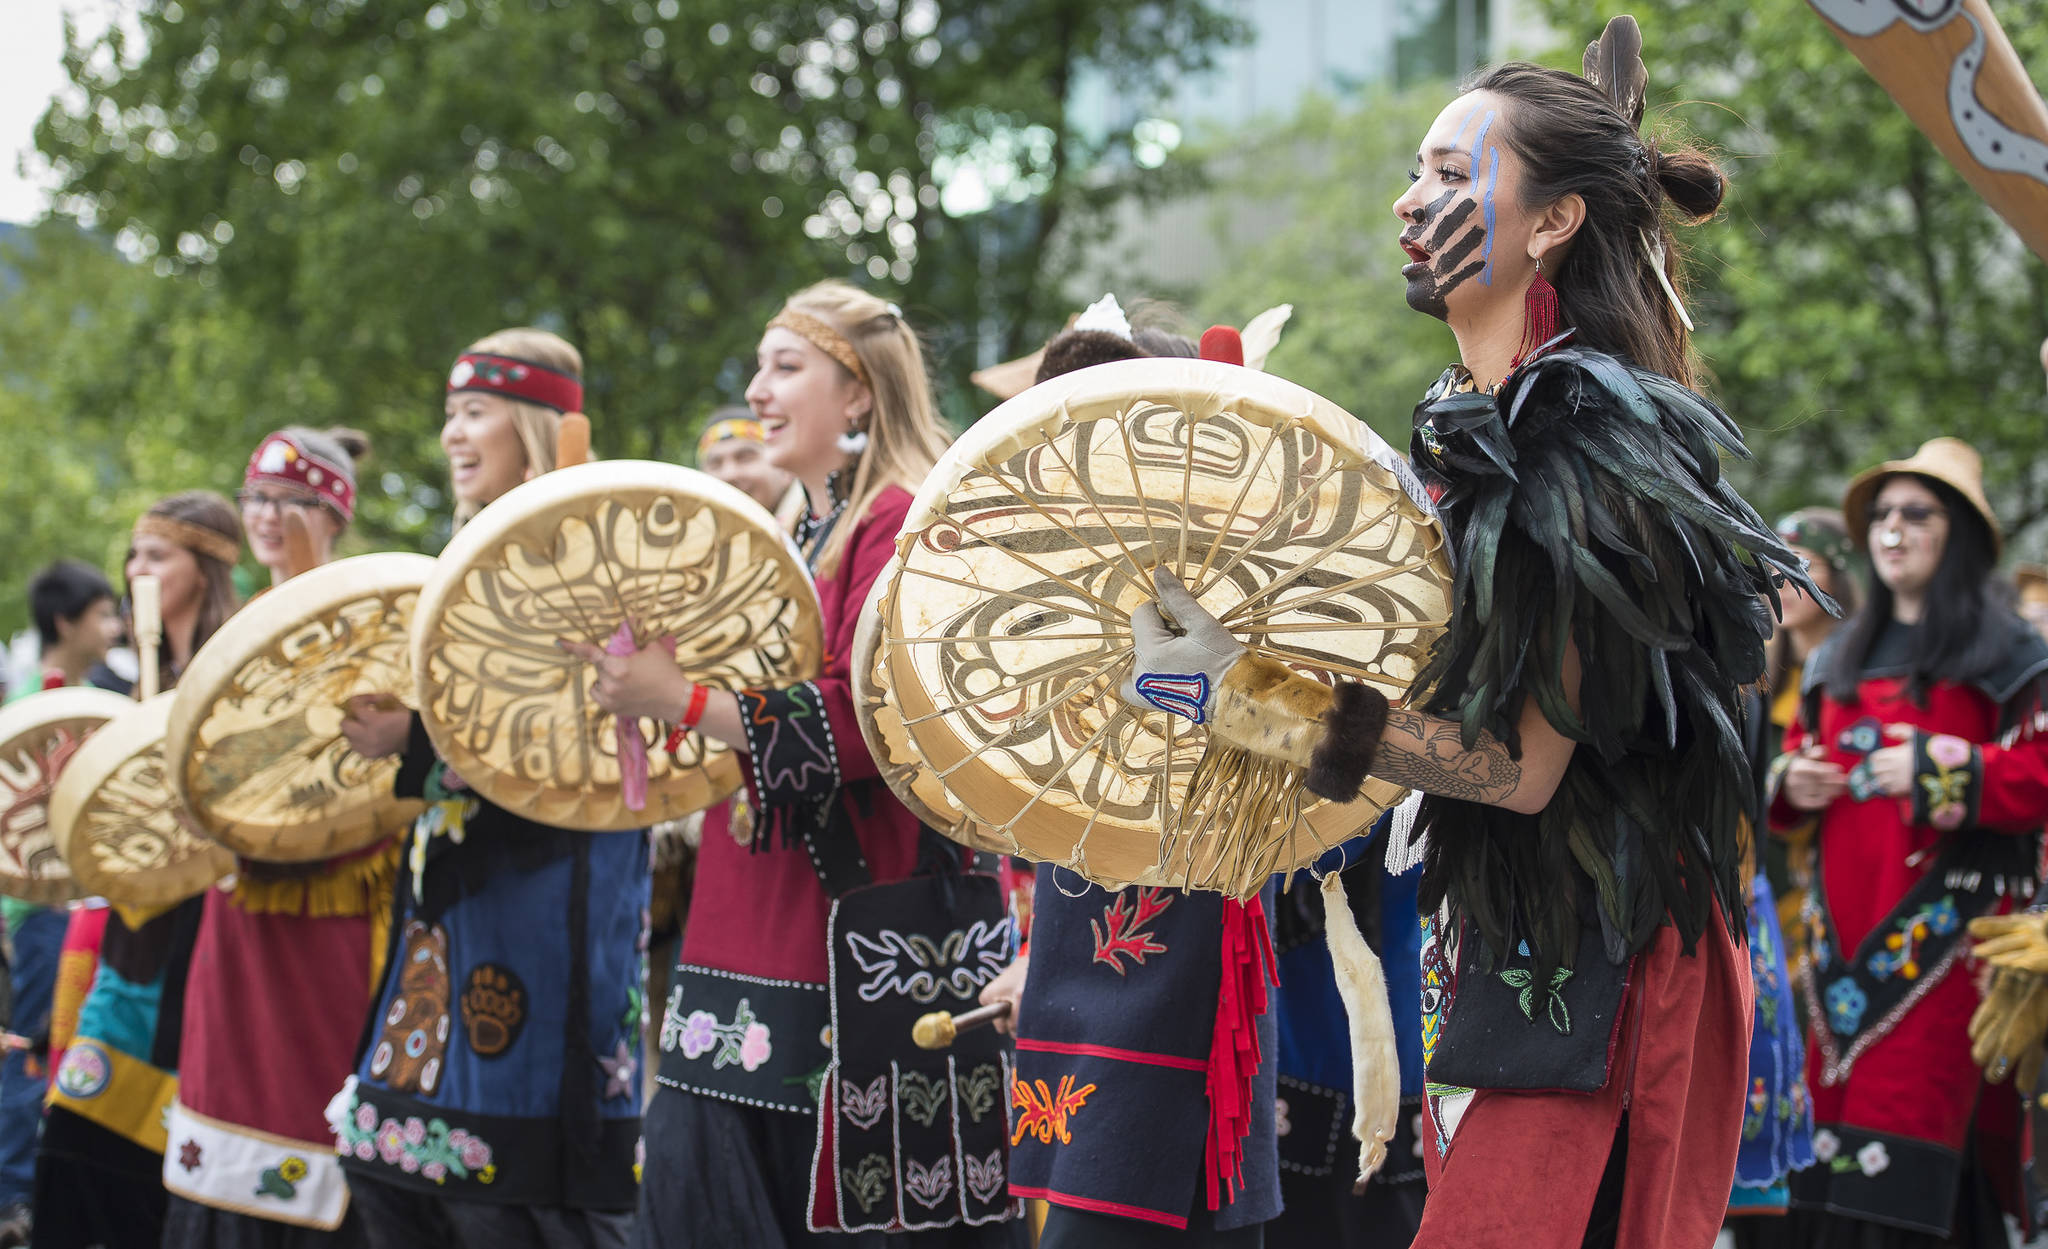 Members of the Mount Saint Elias Dancers of Yakutat parade in the Grand Entrance for Celebration 2018 along Willoughby Avenue on Wednesday, June 6, 2018. (Michael Penn | Juneau Empire)